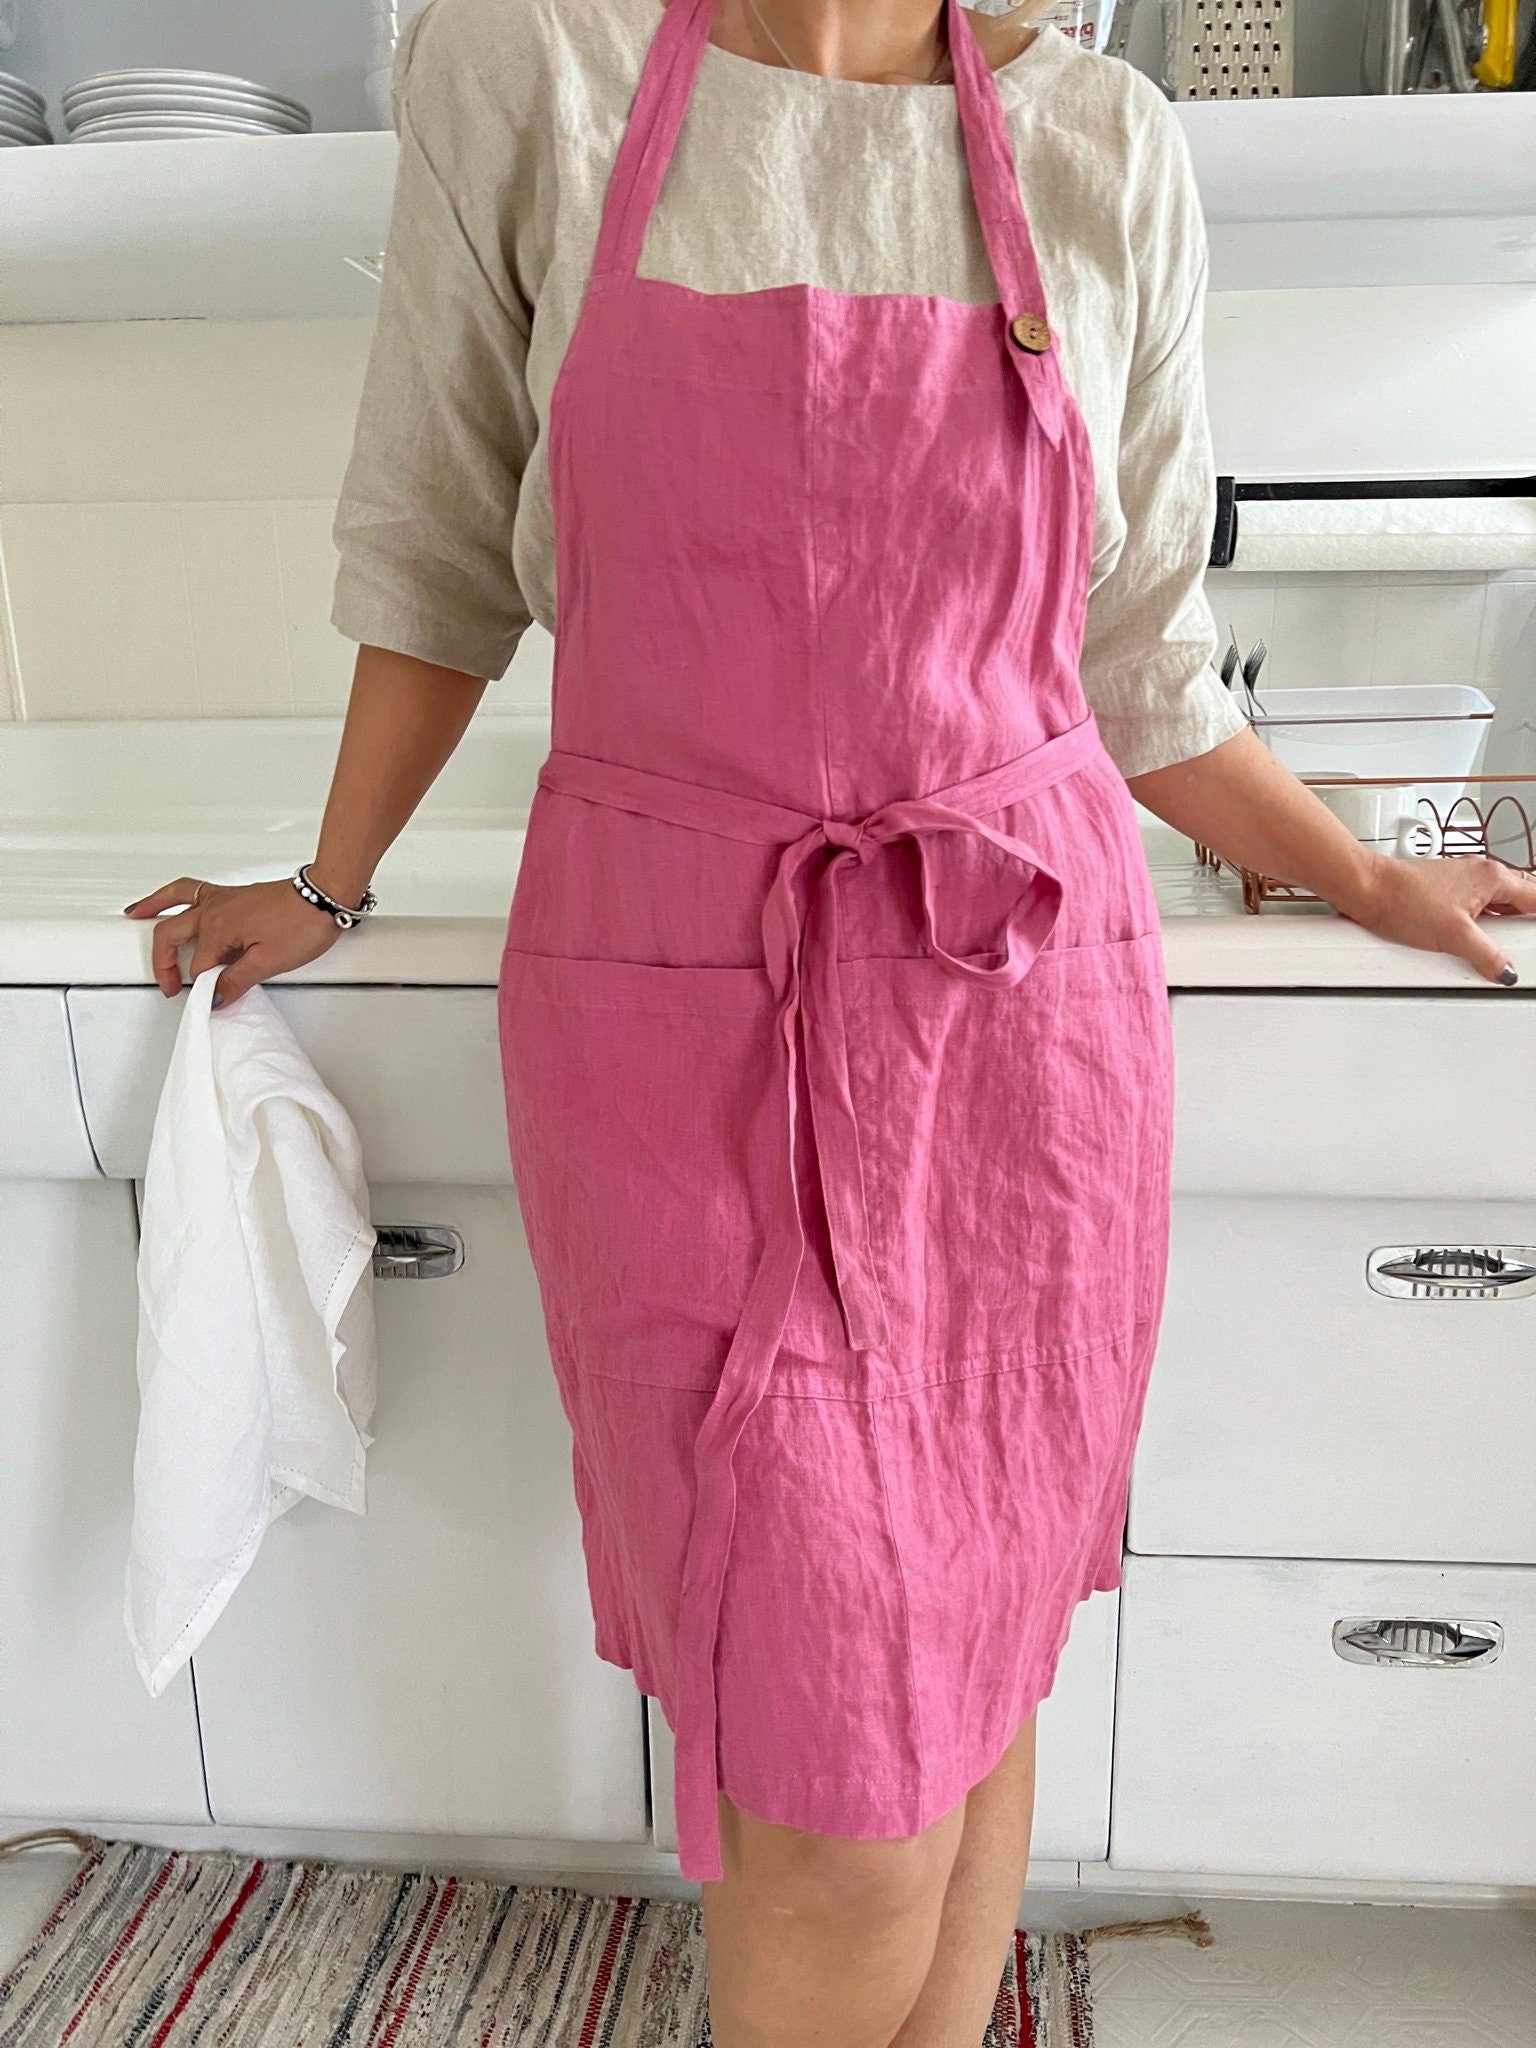 Close-up showcasing the high-quality linen texture of the apron.